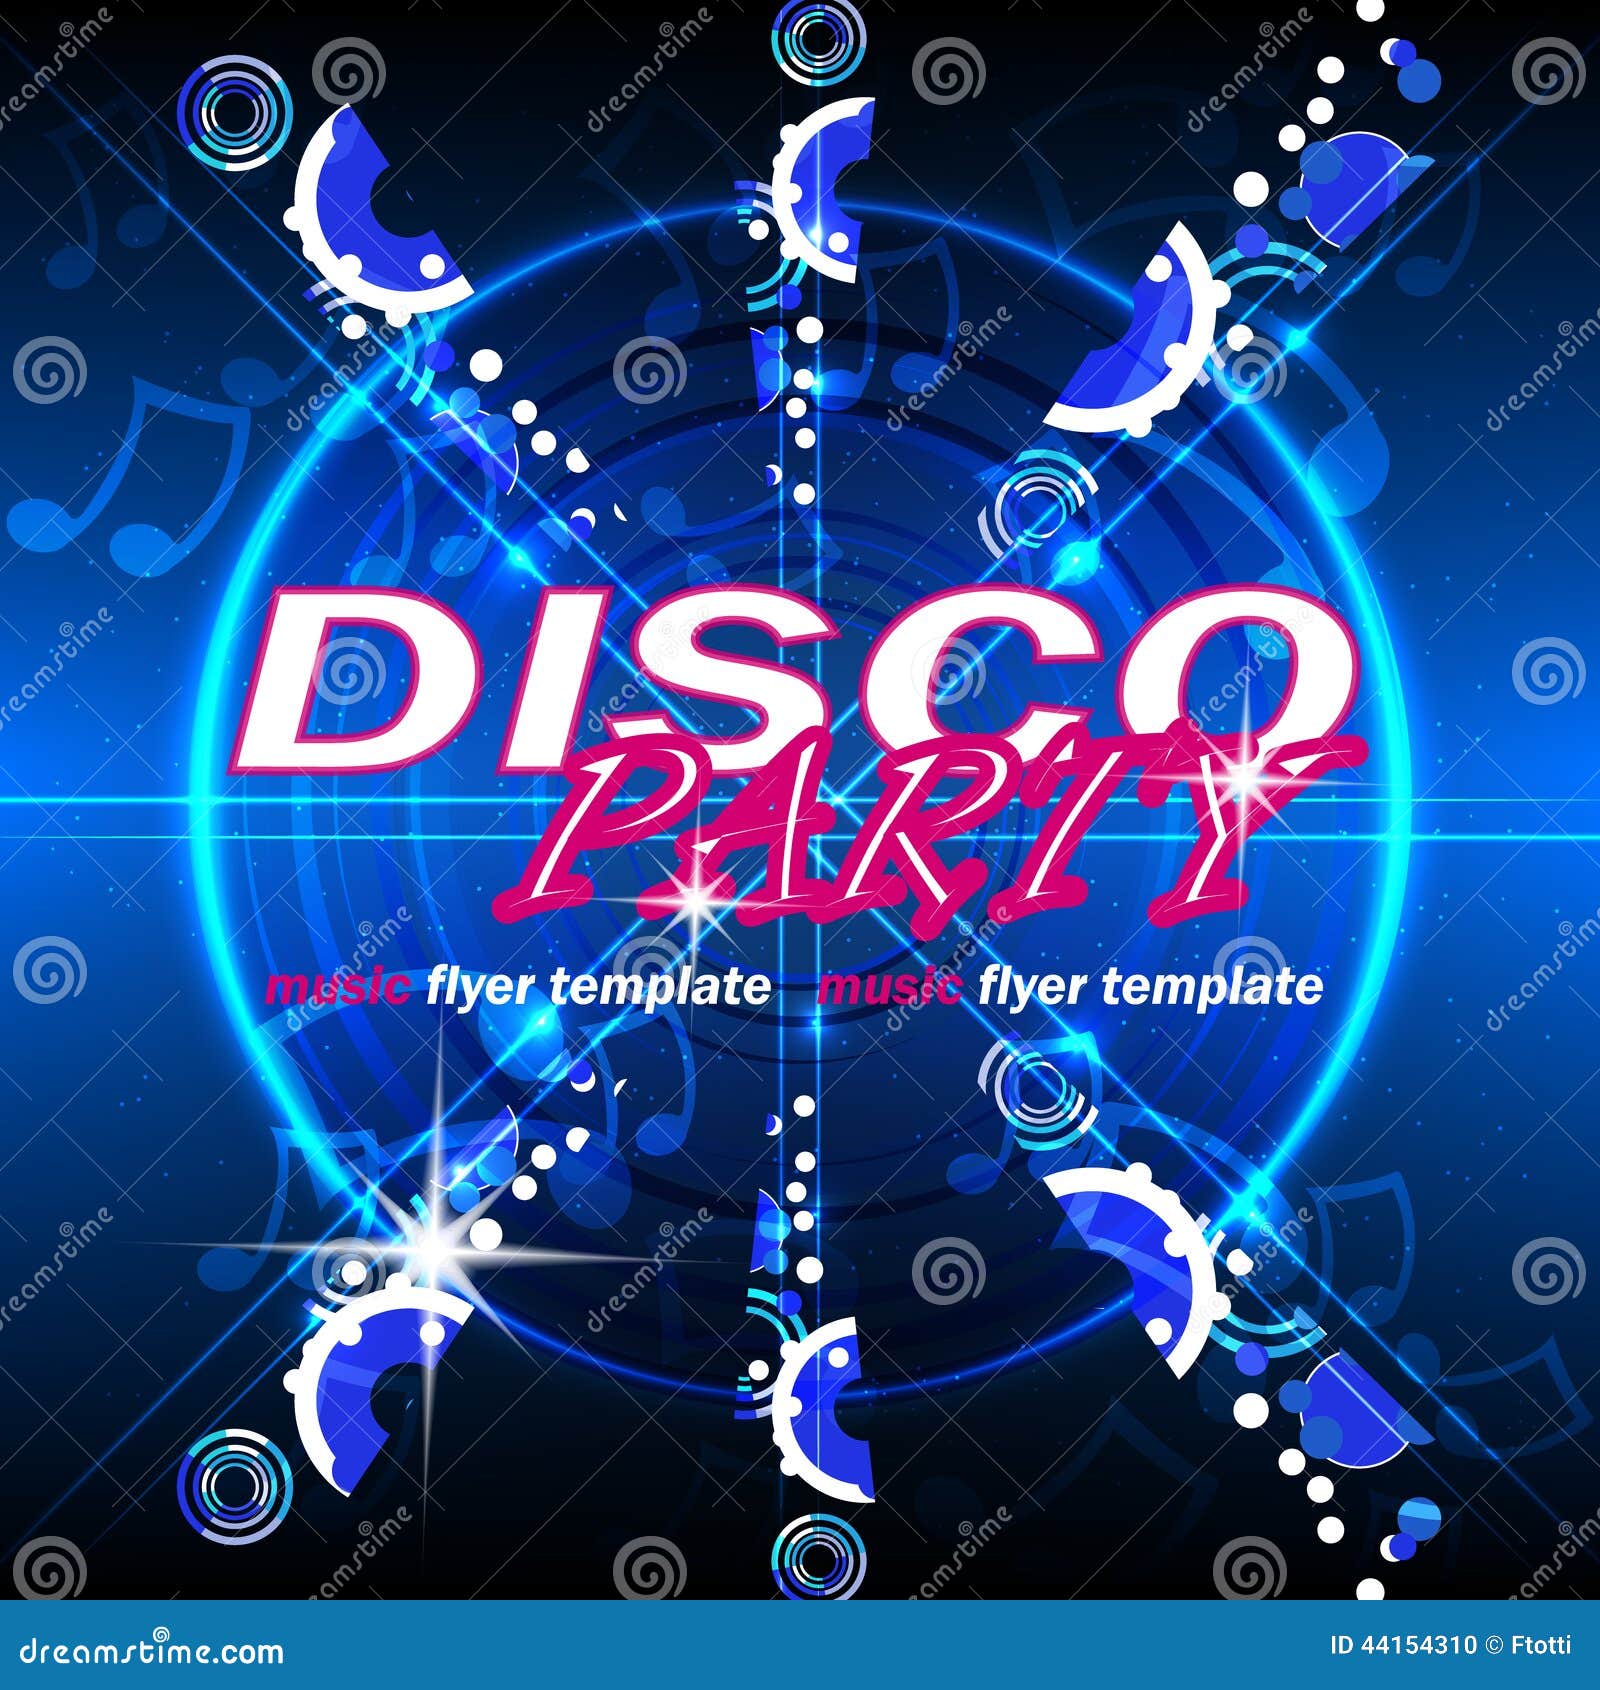 Disco Party Flyer Template Stock Vector Illustration Of